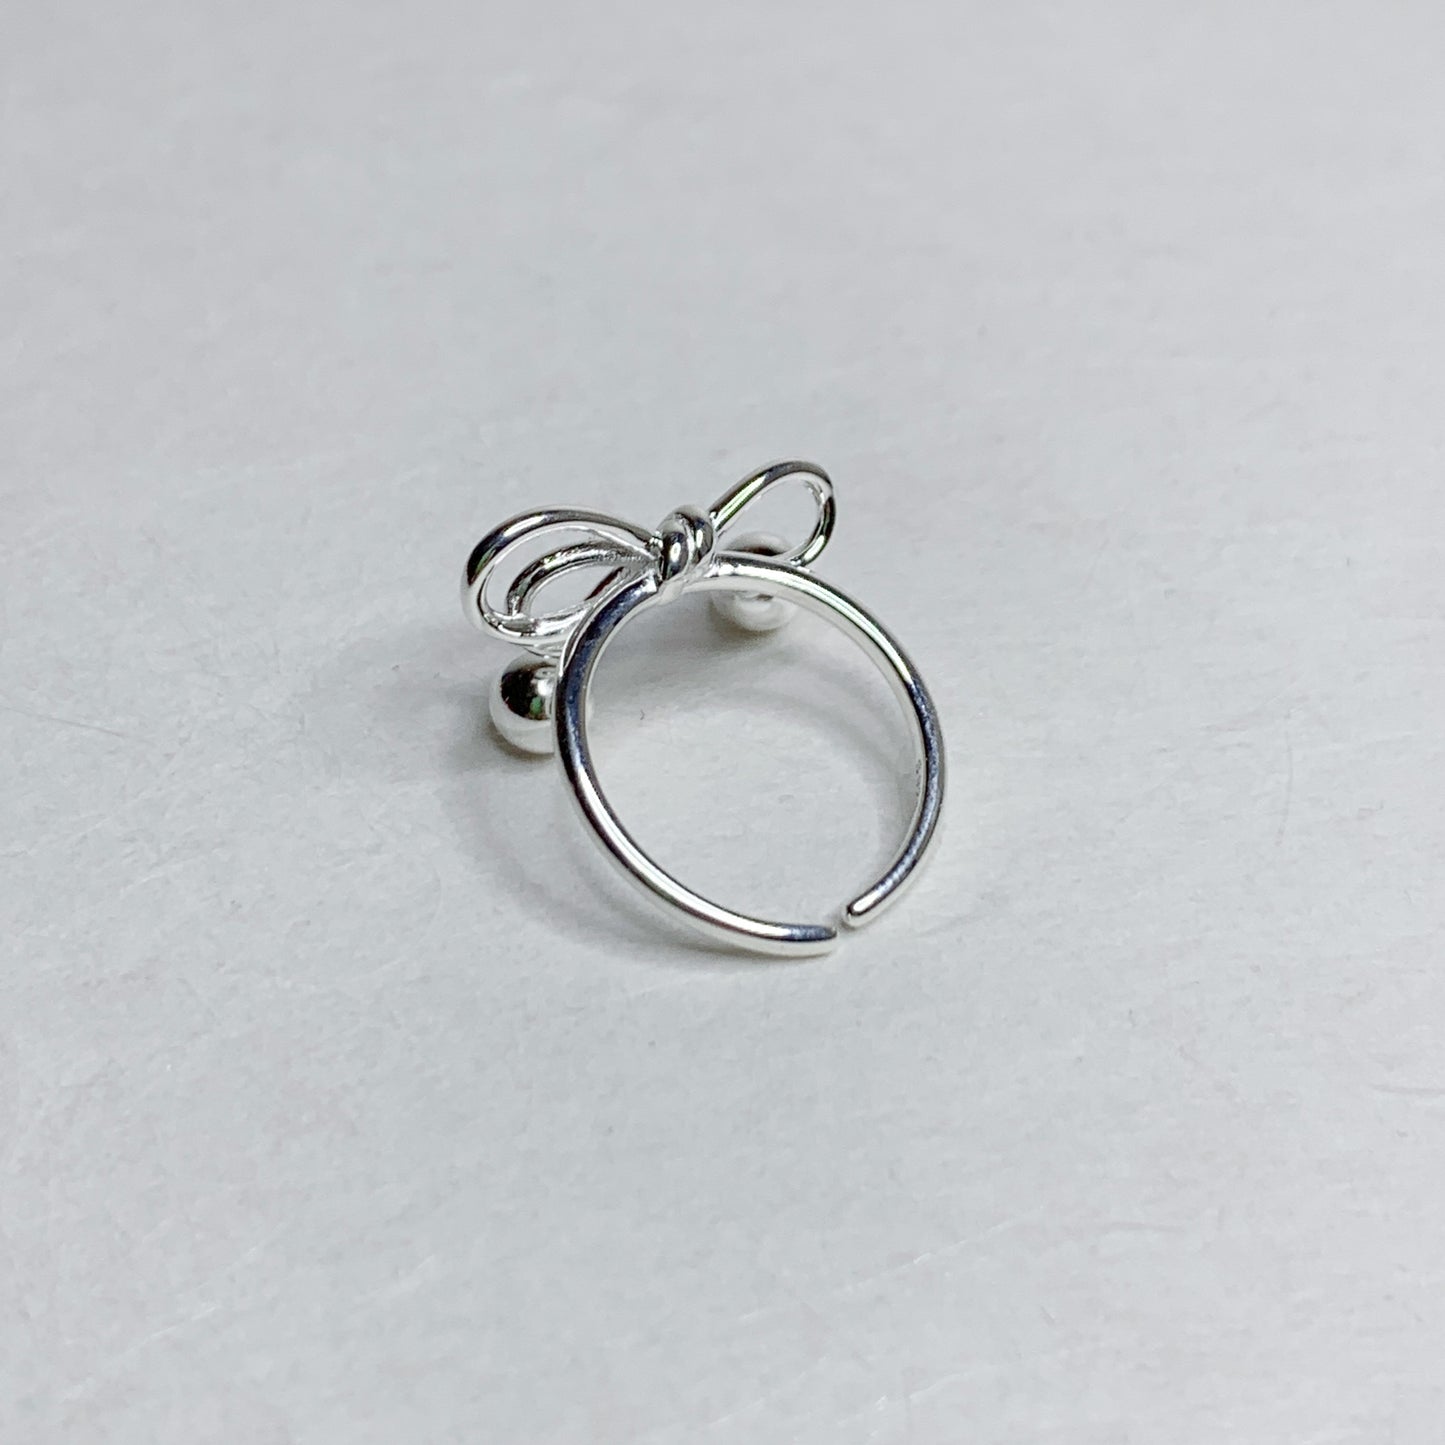 Bow Tie Open Ring